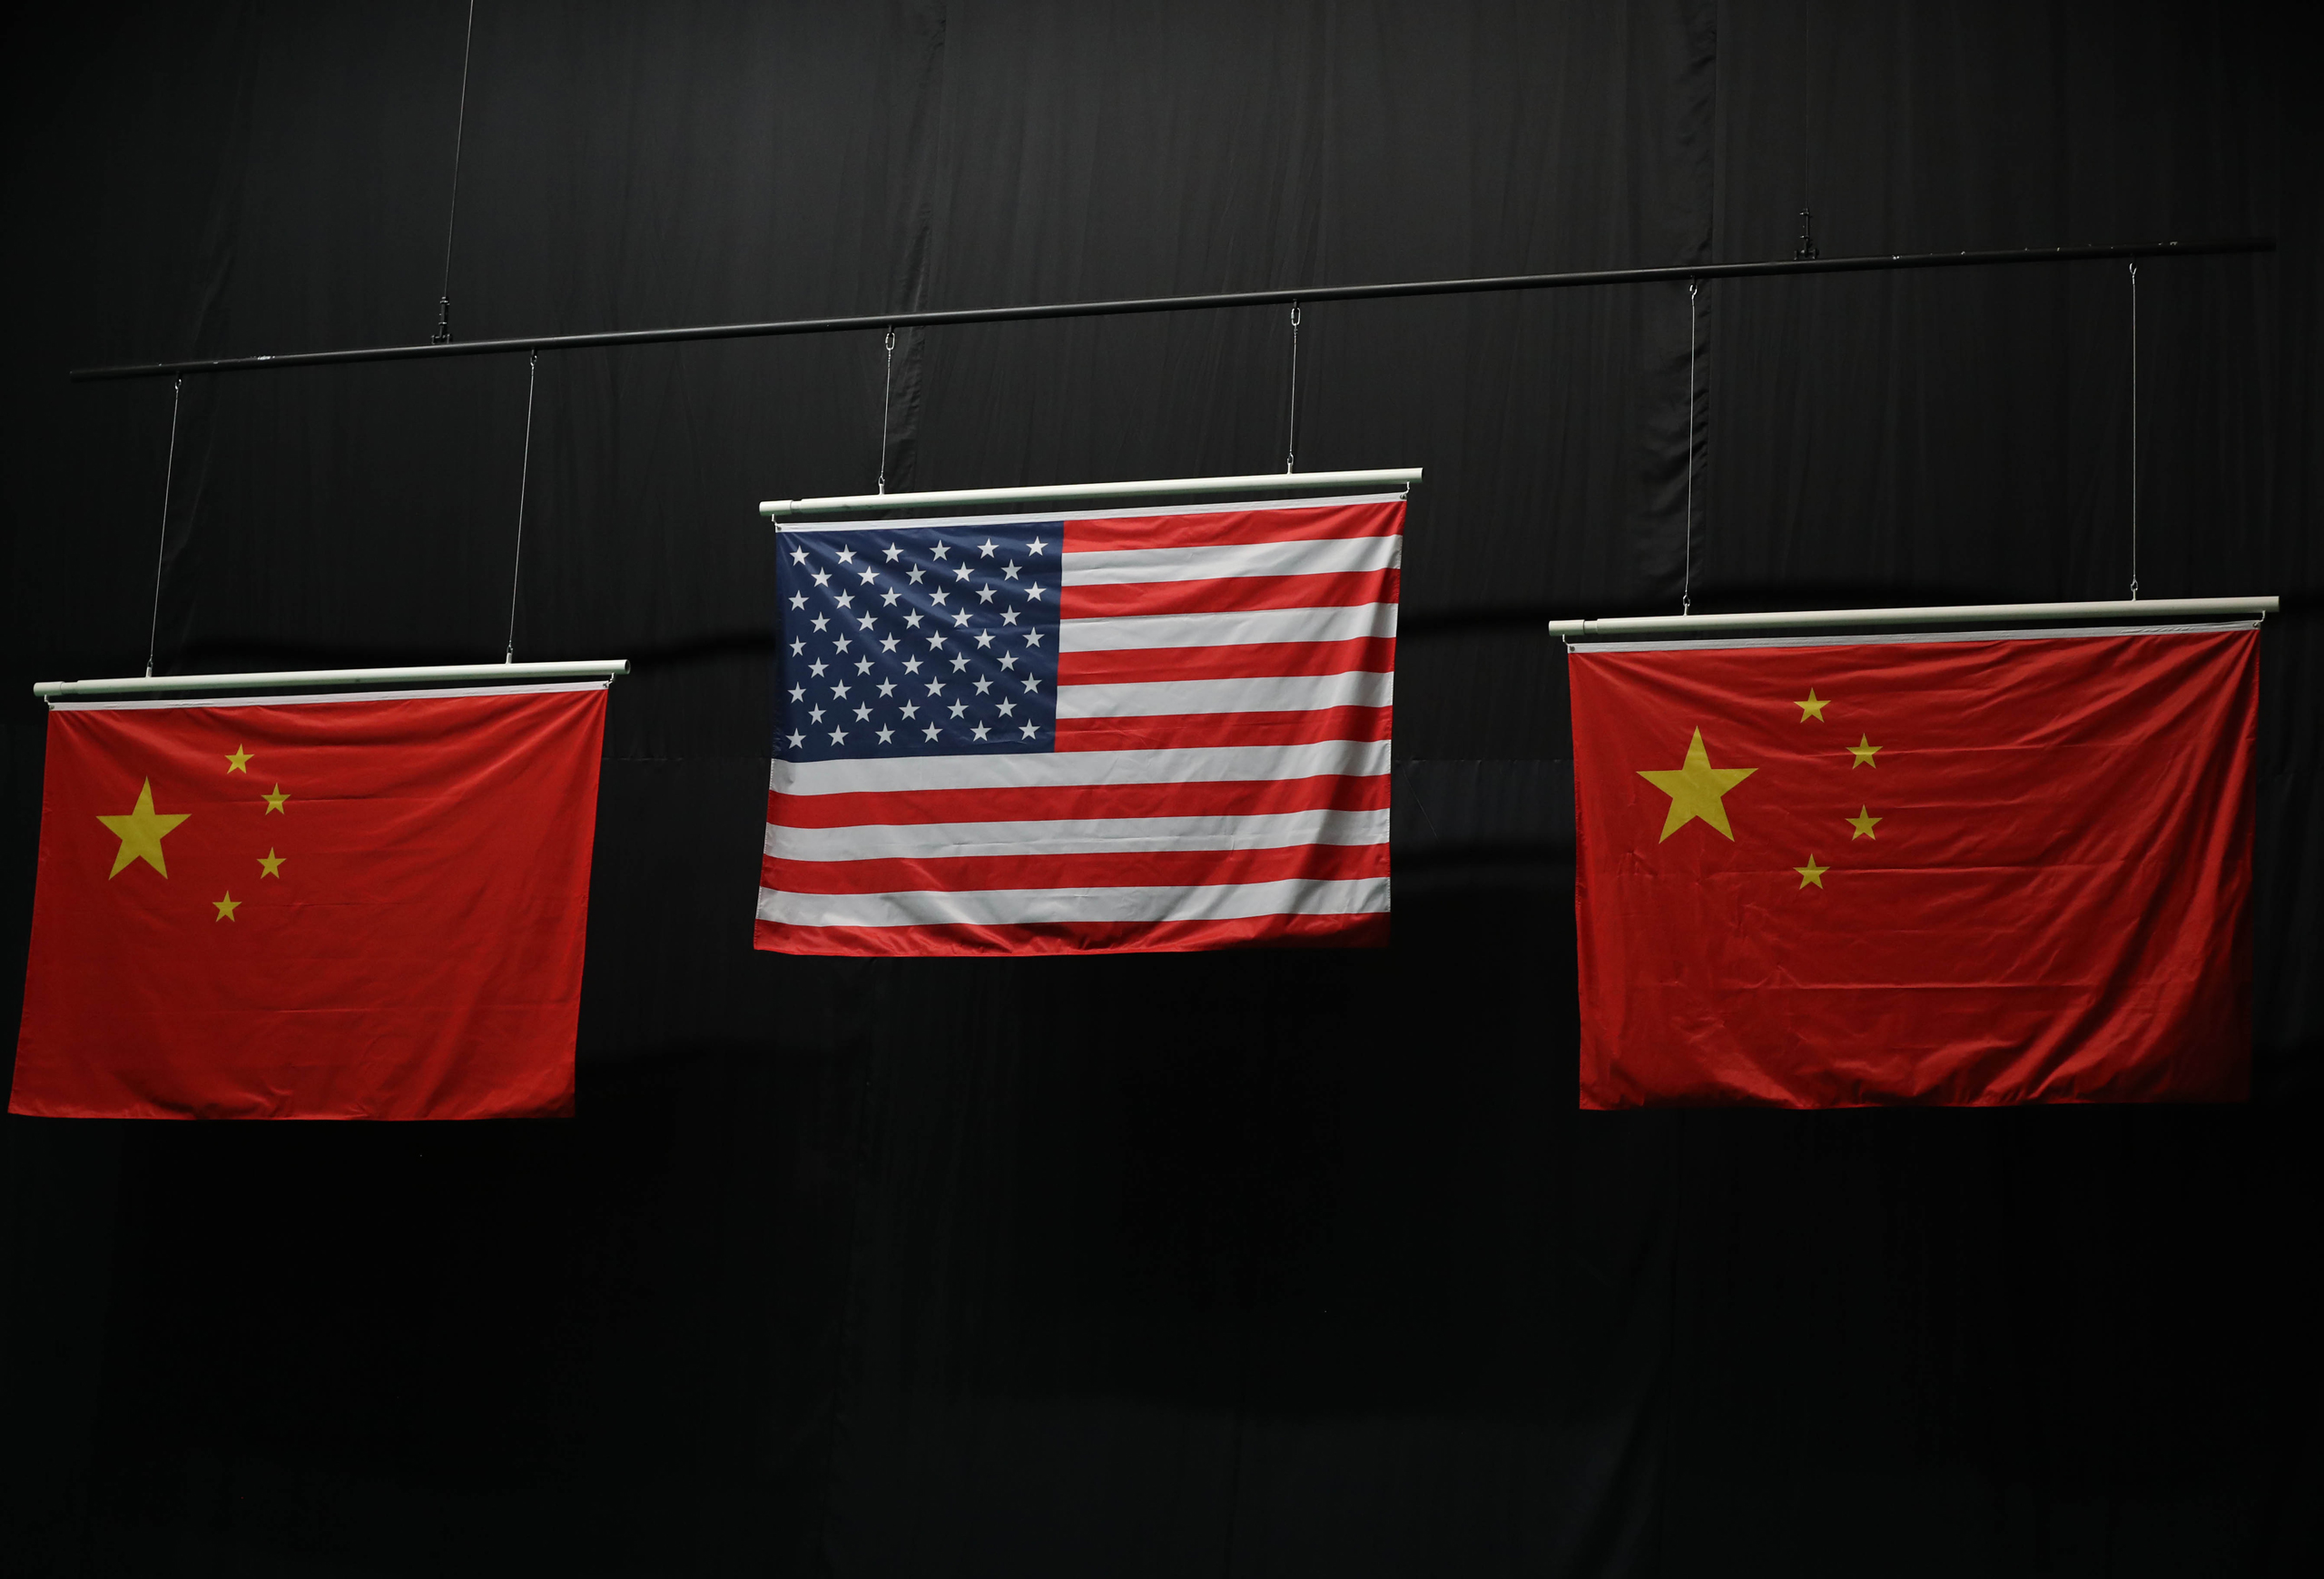 The American flag flies above the Chinese flags after Virginia Thrasher took the gold medal in the 10m air rifle competition at Olympic Shooting Centre in Rio de Janeiro, on Aug 6, 2016. (Geoff Burke-USA TODAY Sports/Reuters)